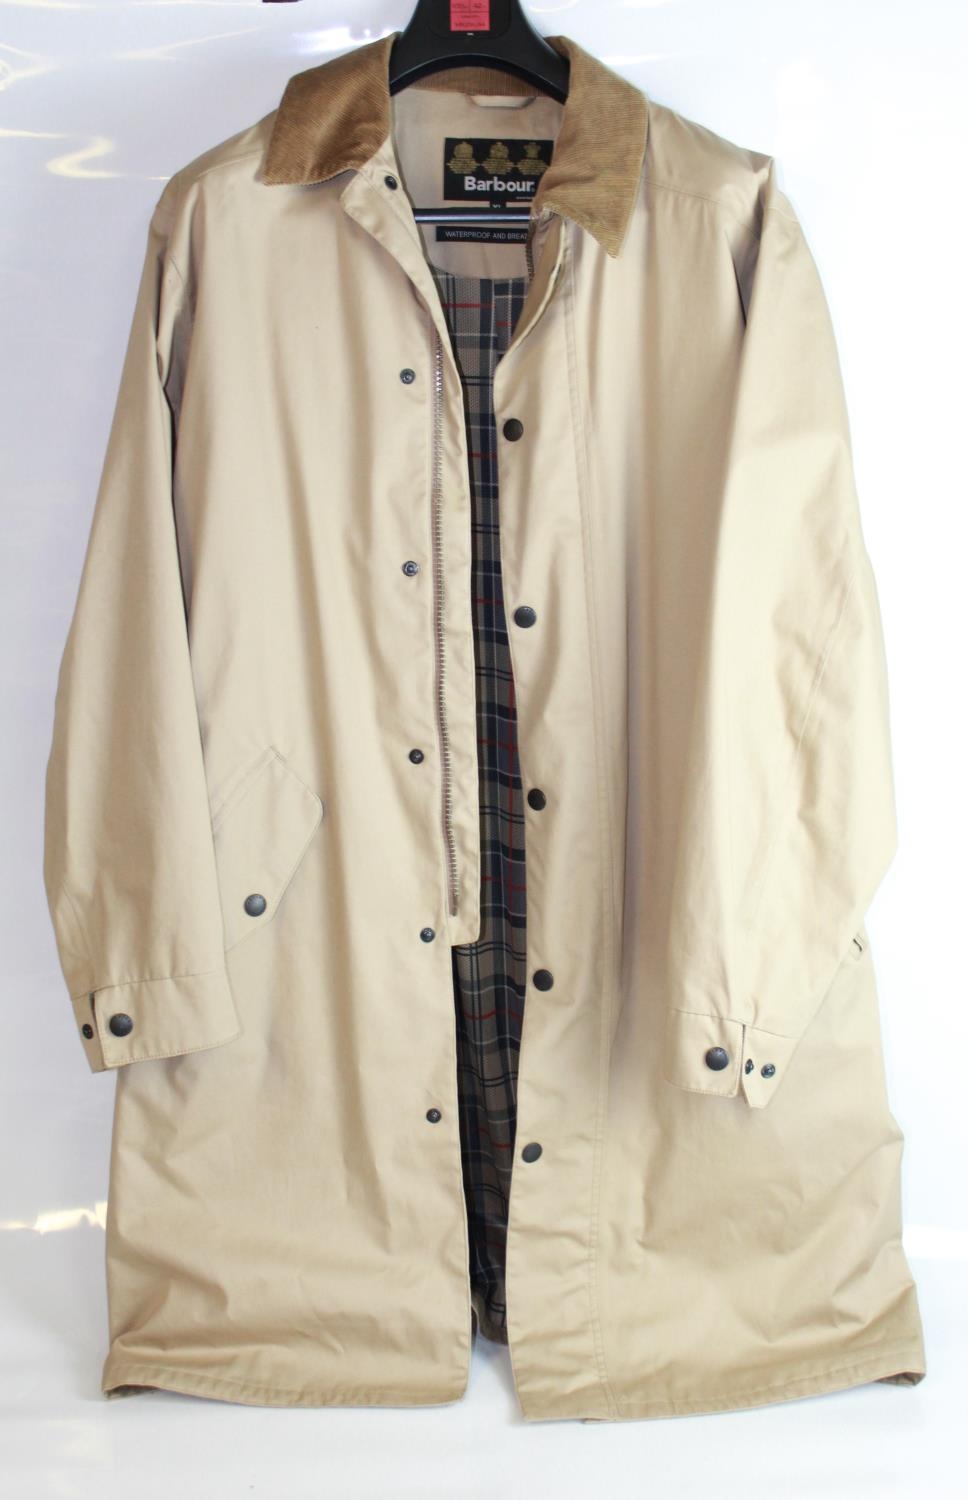 Gents Barbour Melbourne Mac in beige, plaid lined, size XL, never worn